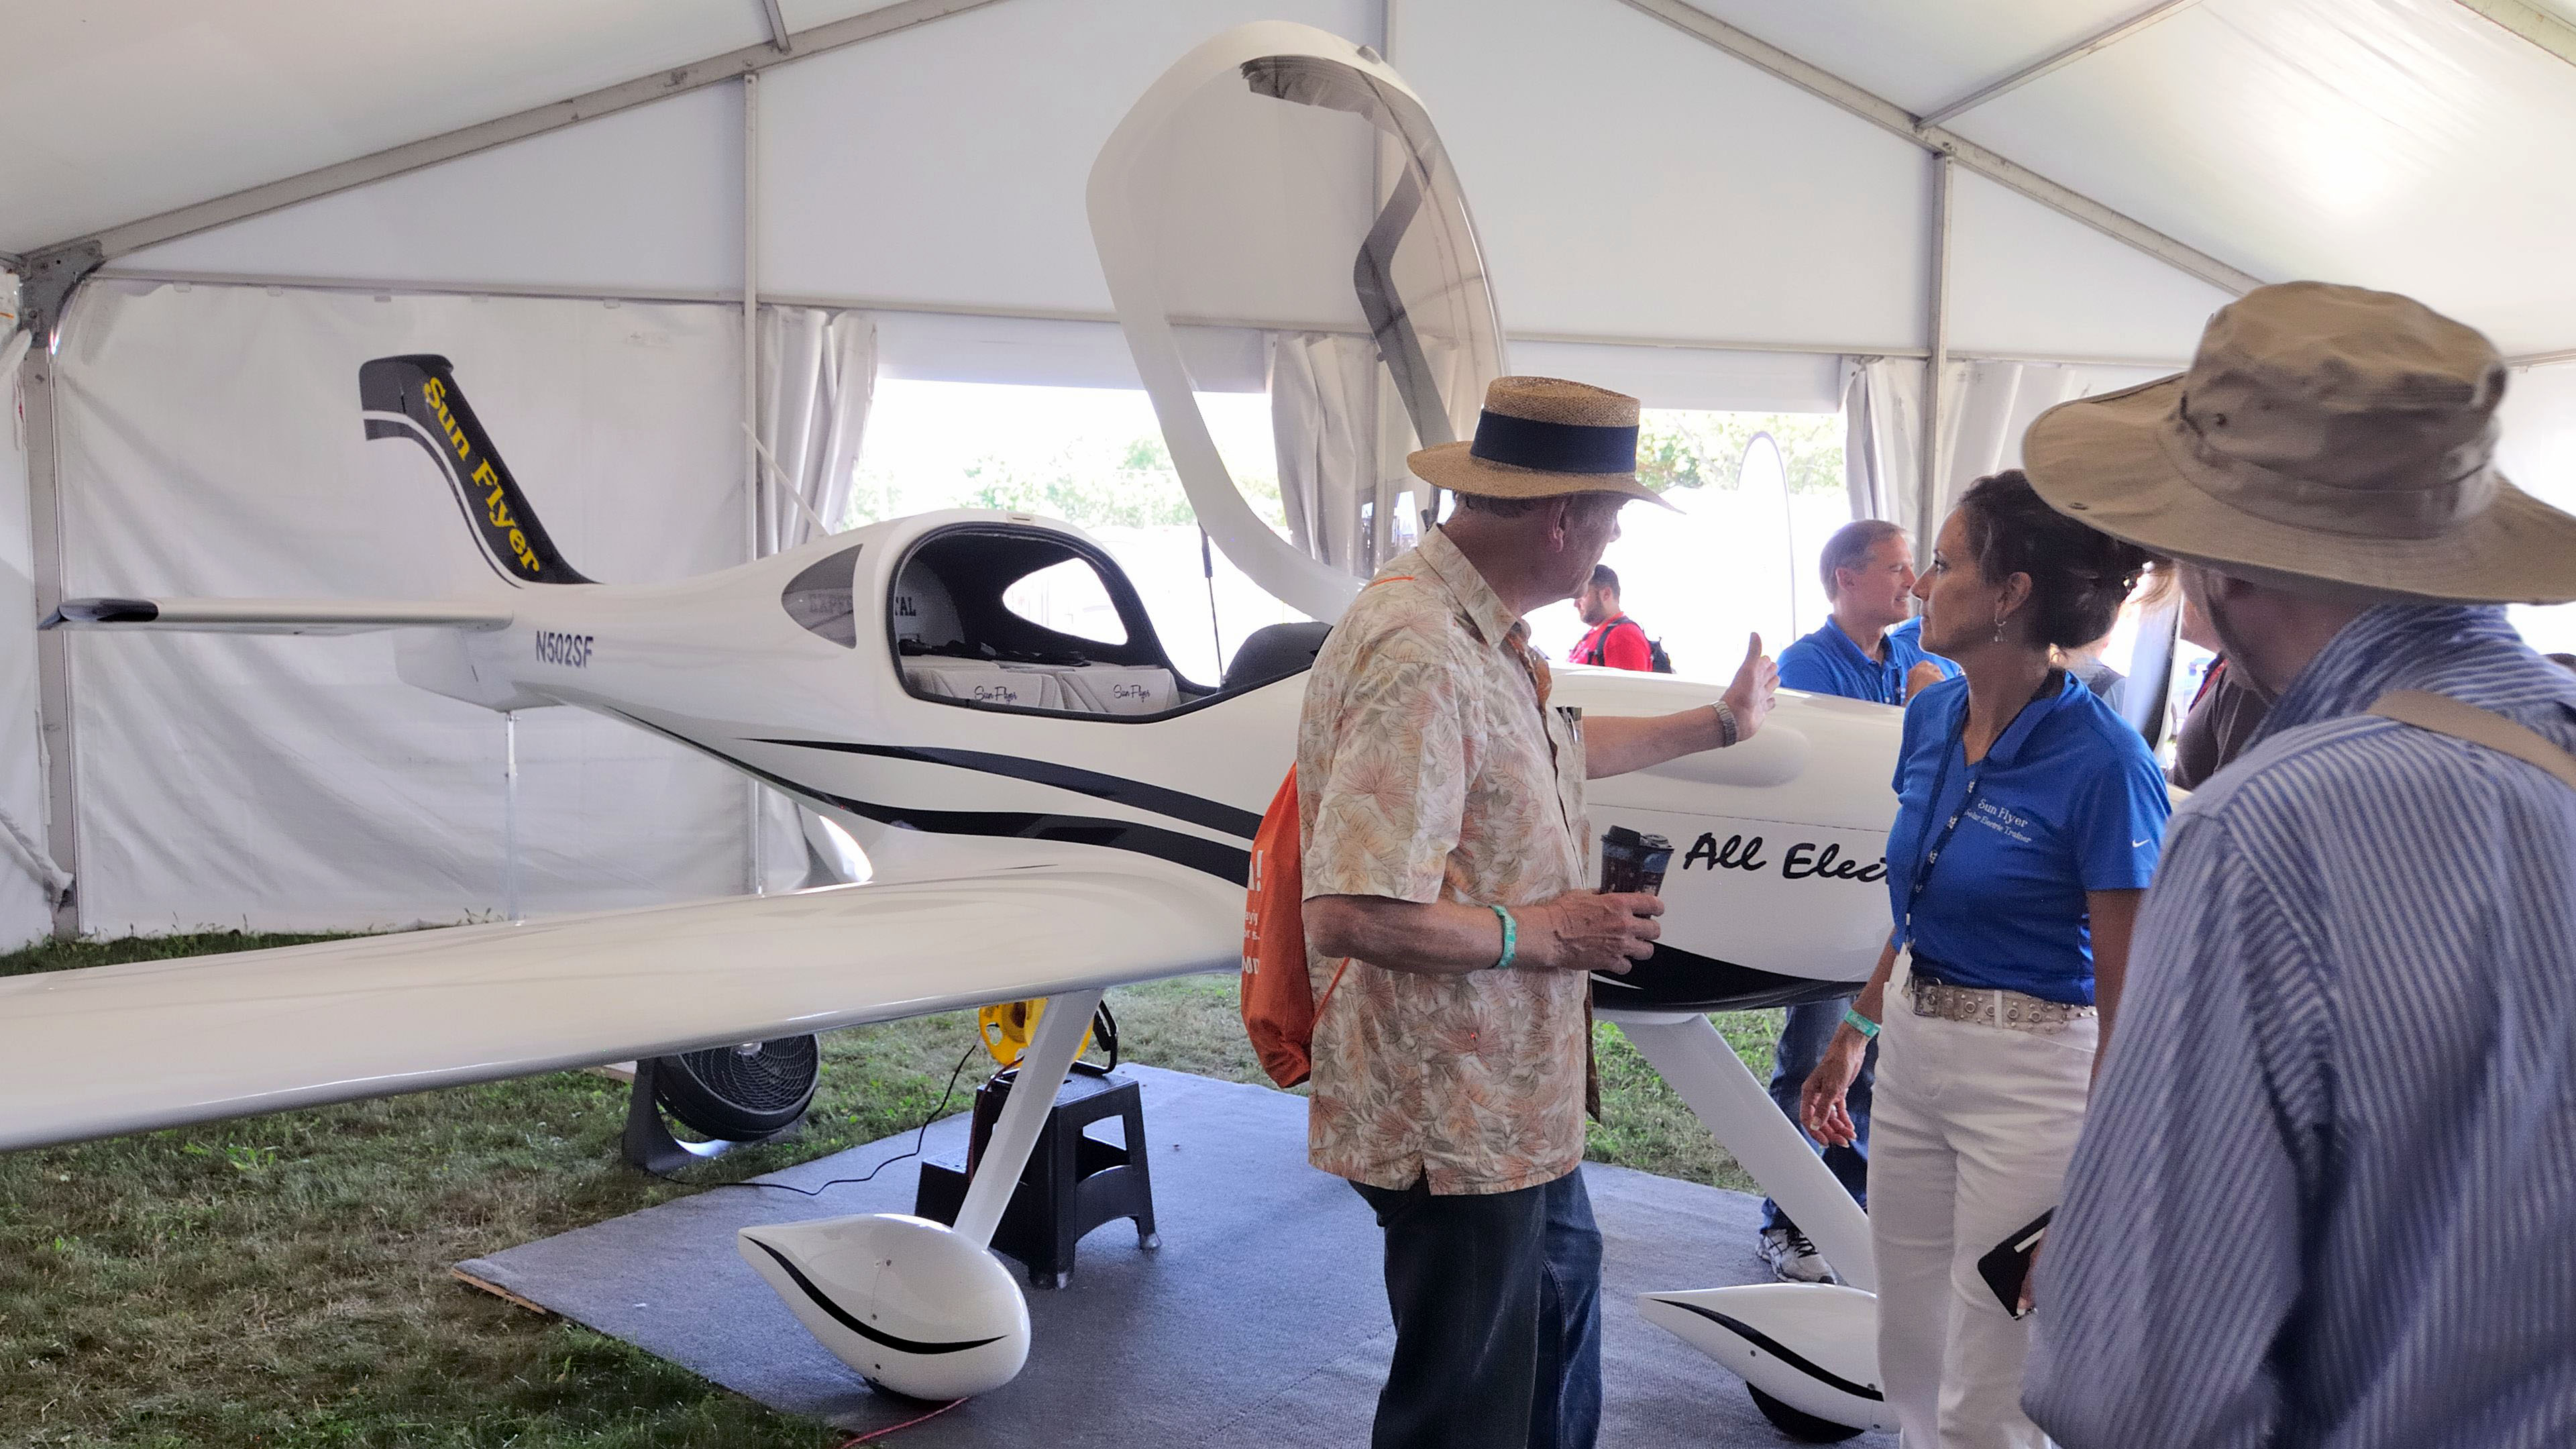 The Sun Flyer electric airplane is drawing a steady stream of people during AirVenture. Photo by Mike Collins.